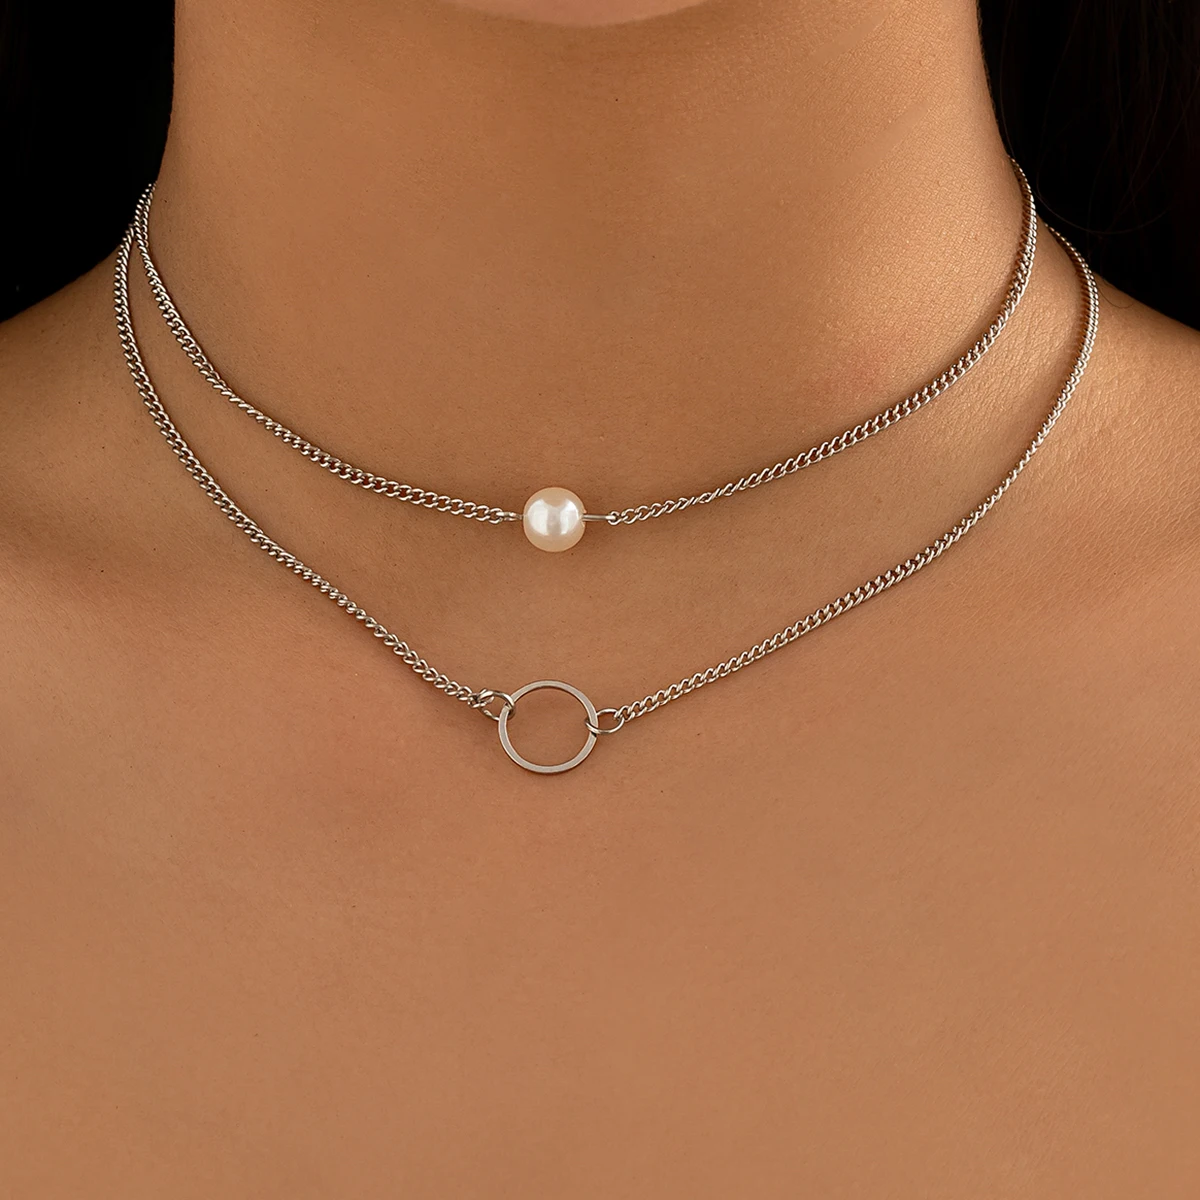 

Lacteo Kpop Silver Color Imitation Pearl Pendant Short Chain Necklace for Women Jewelry On The Neck Clavicle Chain Party Gifts